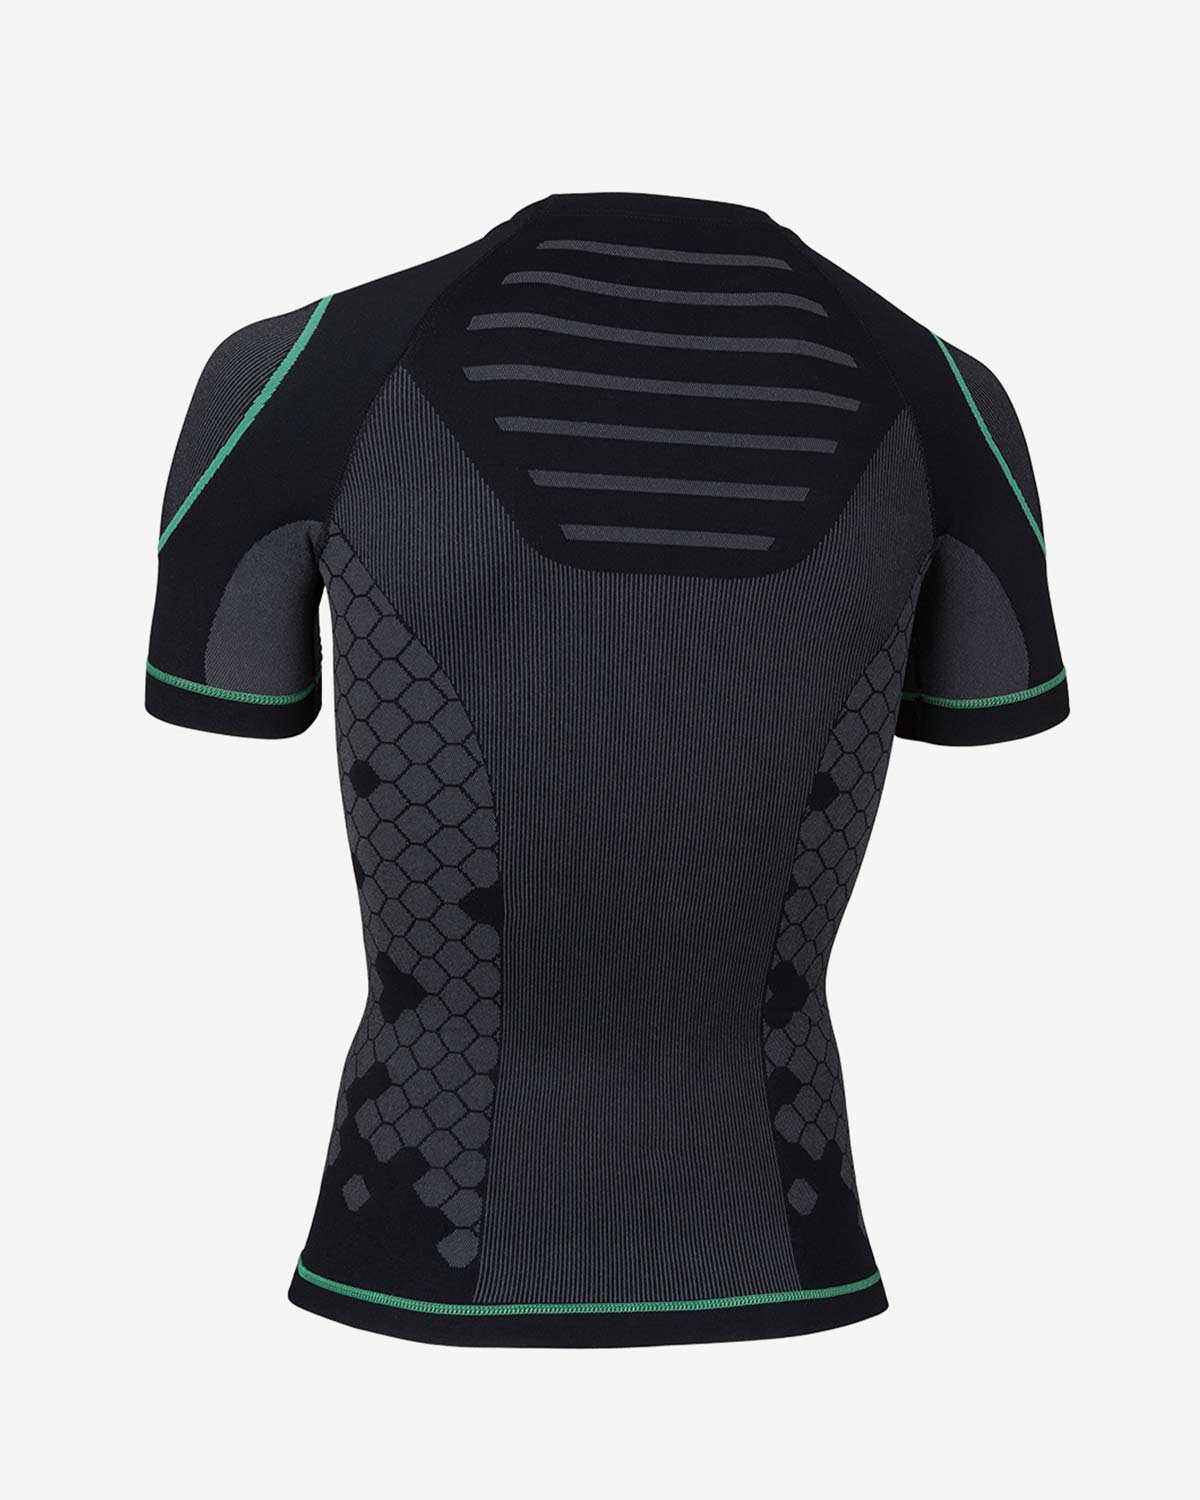 Enertor Black and Green Base Layers Top - Back